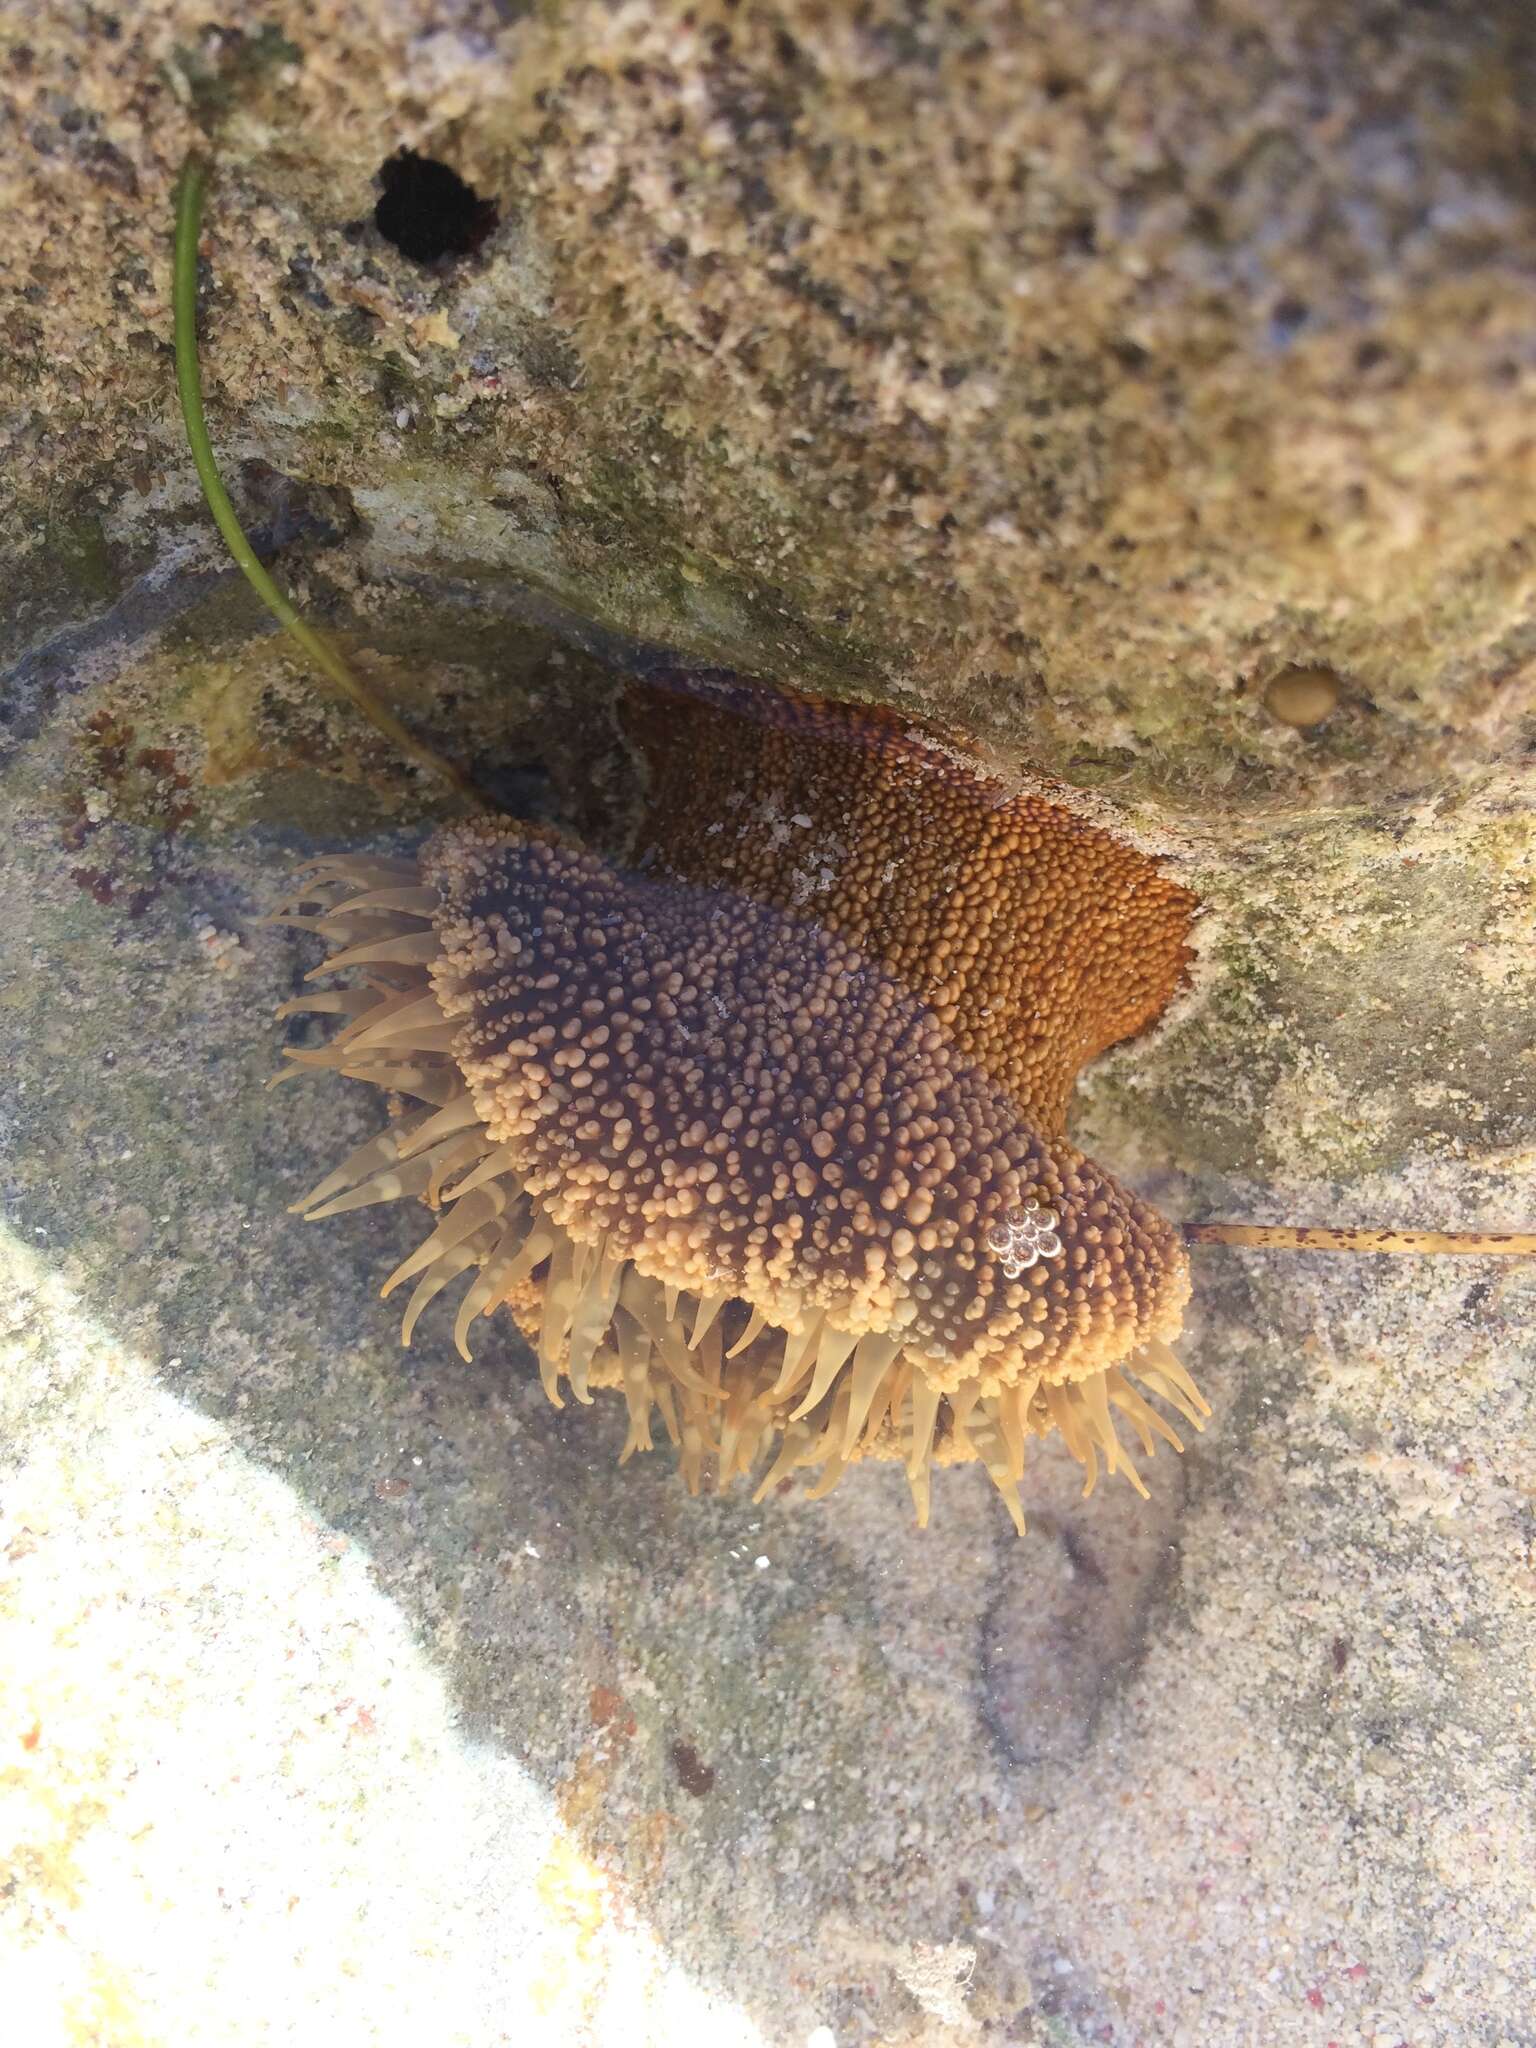 Image of red warty anemone